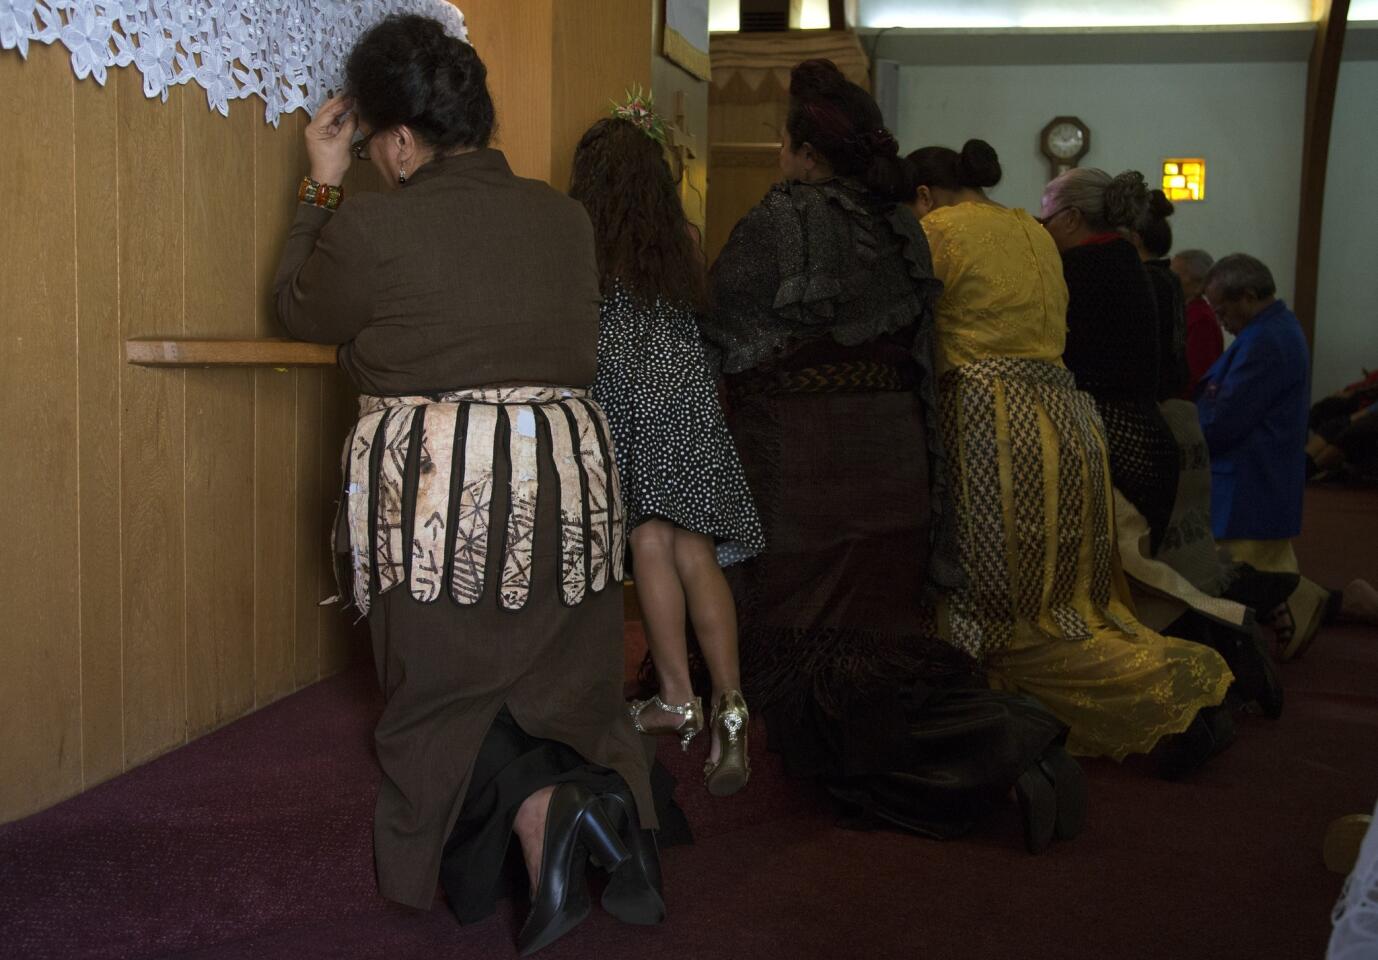 Members of the congregation kneel in prayer at the front of the Tongan United Methodist Church during the Sunday service.